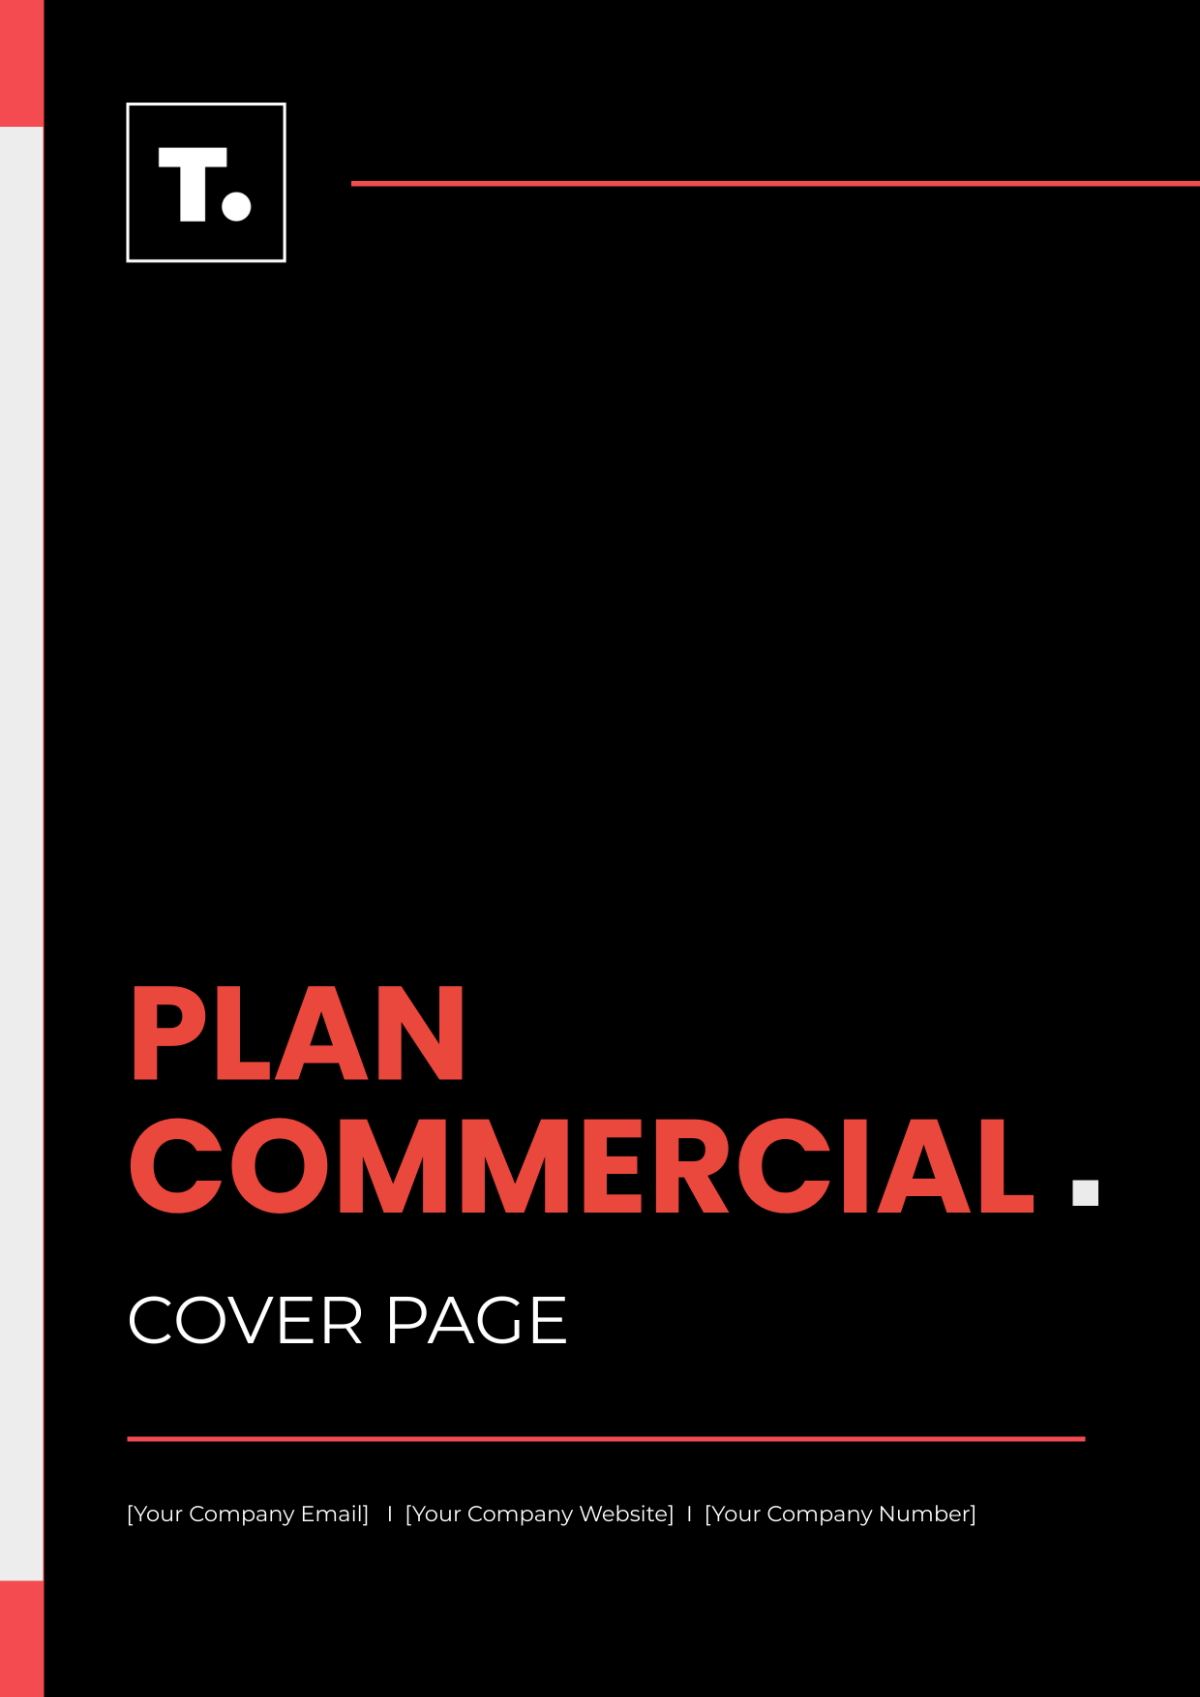 Plan Commercial Cover Page